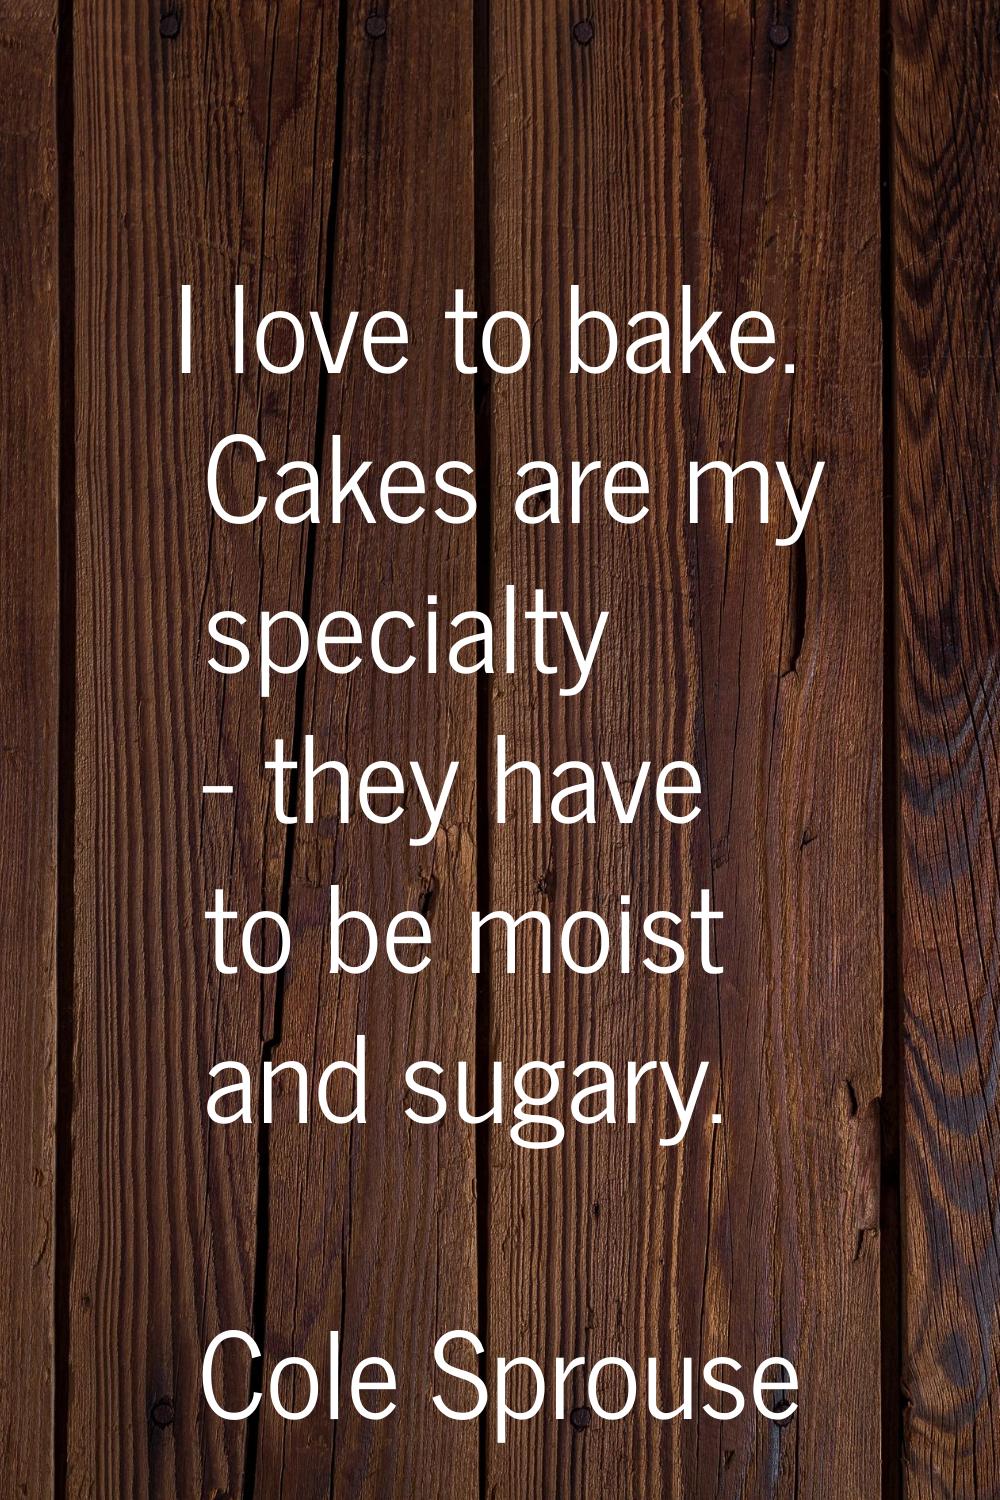 I love to bake. Cakes are my specialty - they have to be moist and sugary.